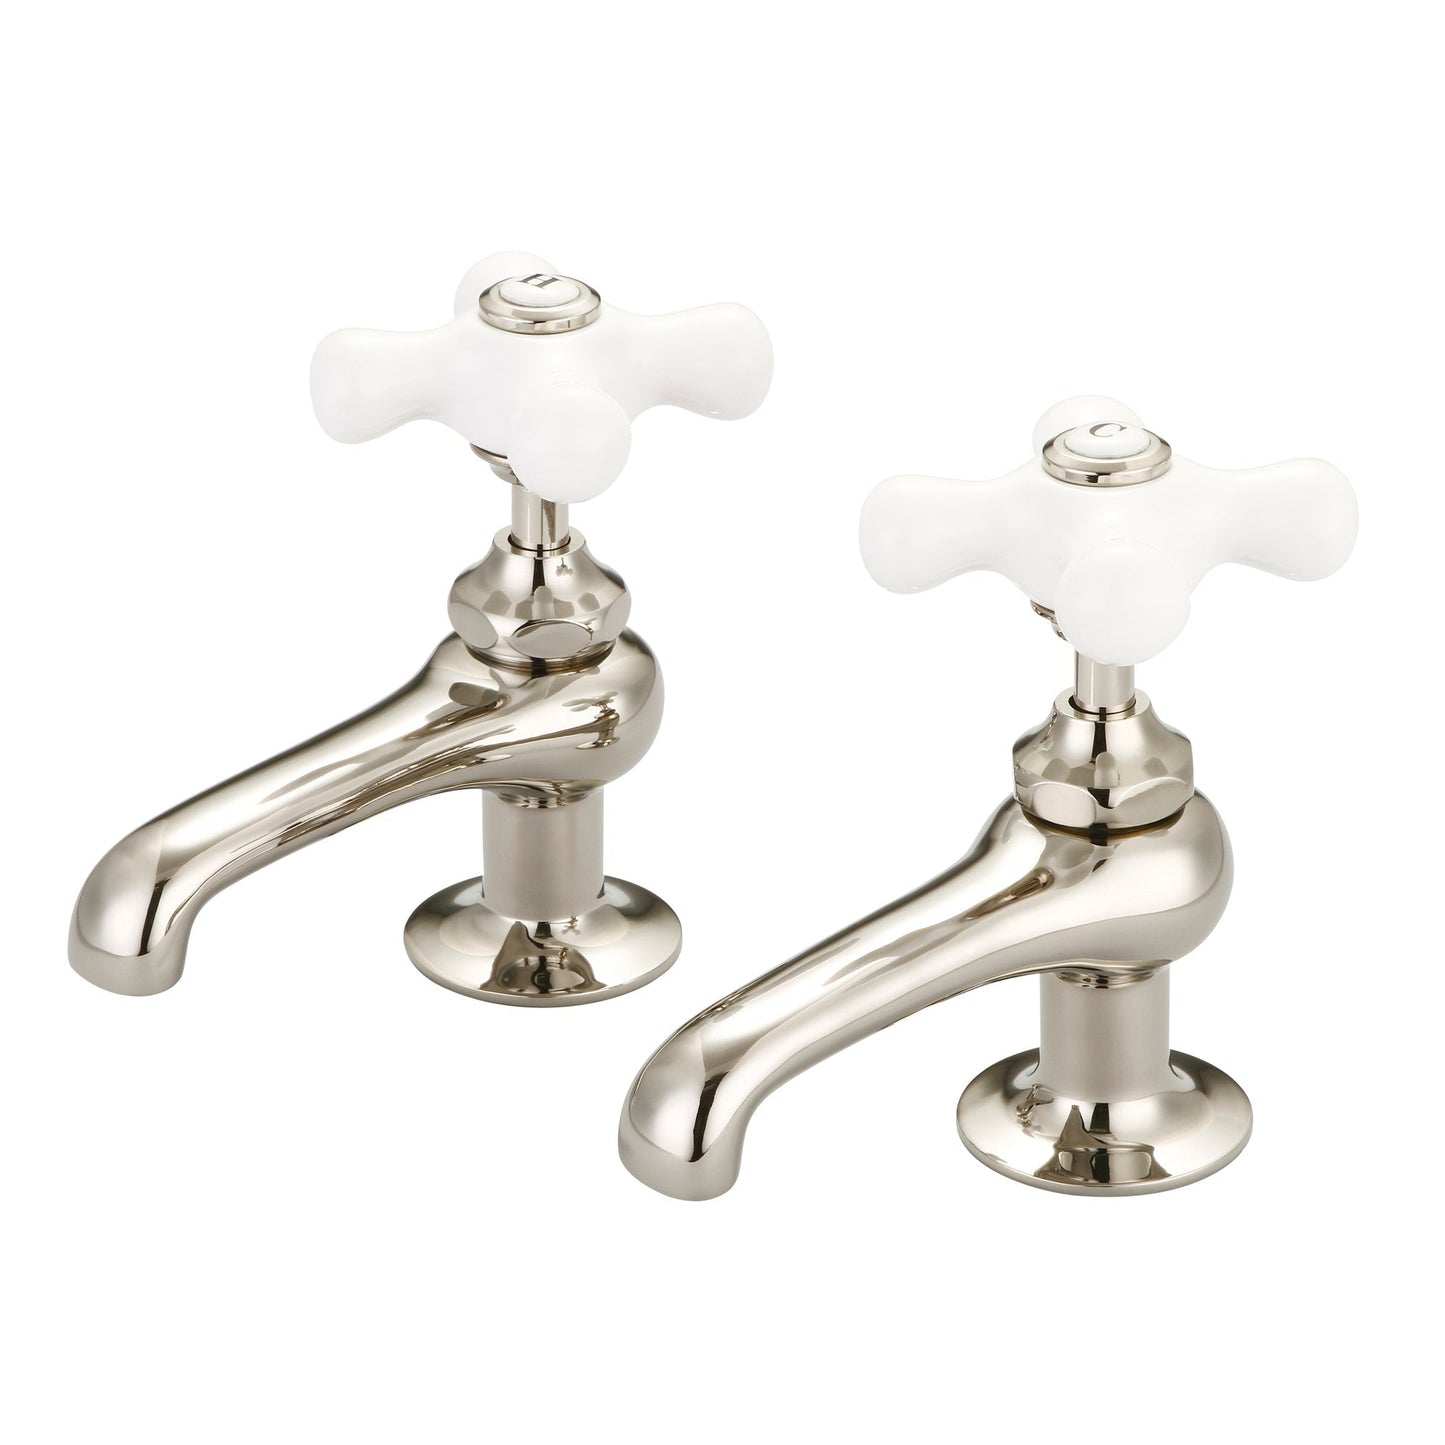 Water Creation Vintage Classic Basin Cocks Lavatory F1-0003 1.88" Ivory Solid Brass Faucet With Porcelain Cross Handles, Hot And Cold Labels Included